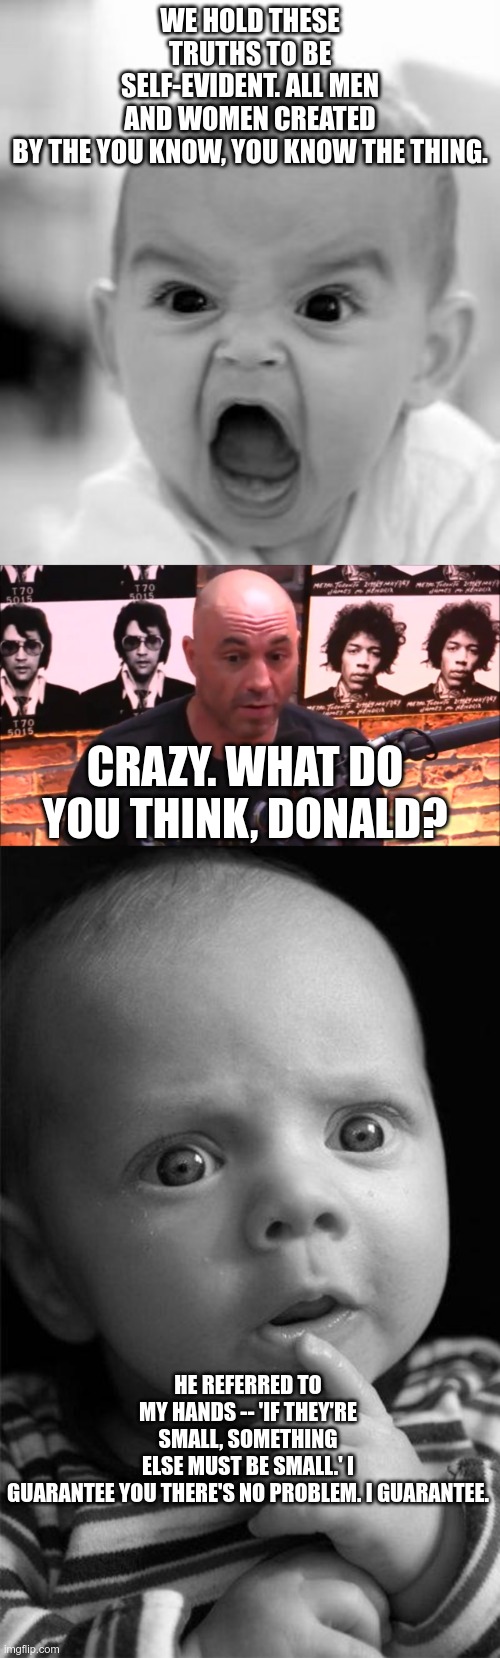 Presidential Debate | WE HOLD THESE TRUTHS TO BE SELF-EVIDENT. ALL MEN AND WOMEN CREATED BY THE YOU KNOW, YOU KNOW THE THING. CRAZY. WHAT DO YOU THINK, DONALD? HE REFERRED TO MY HANDS -- 'IF THEY'RE SMALL, SOMETHING ELSE MUST BE SMALL.' I GUARANTEE YOU THERE'S NO PROBLEM. I GUARANTEE. | image tagged in joe rogan jre,donald trump,joe biden | made w/ Imgflip meme maker